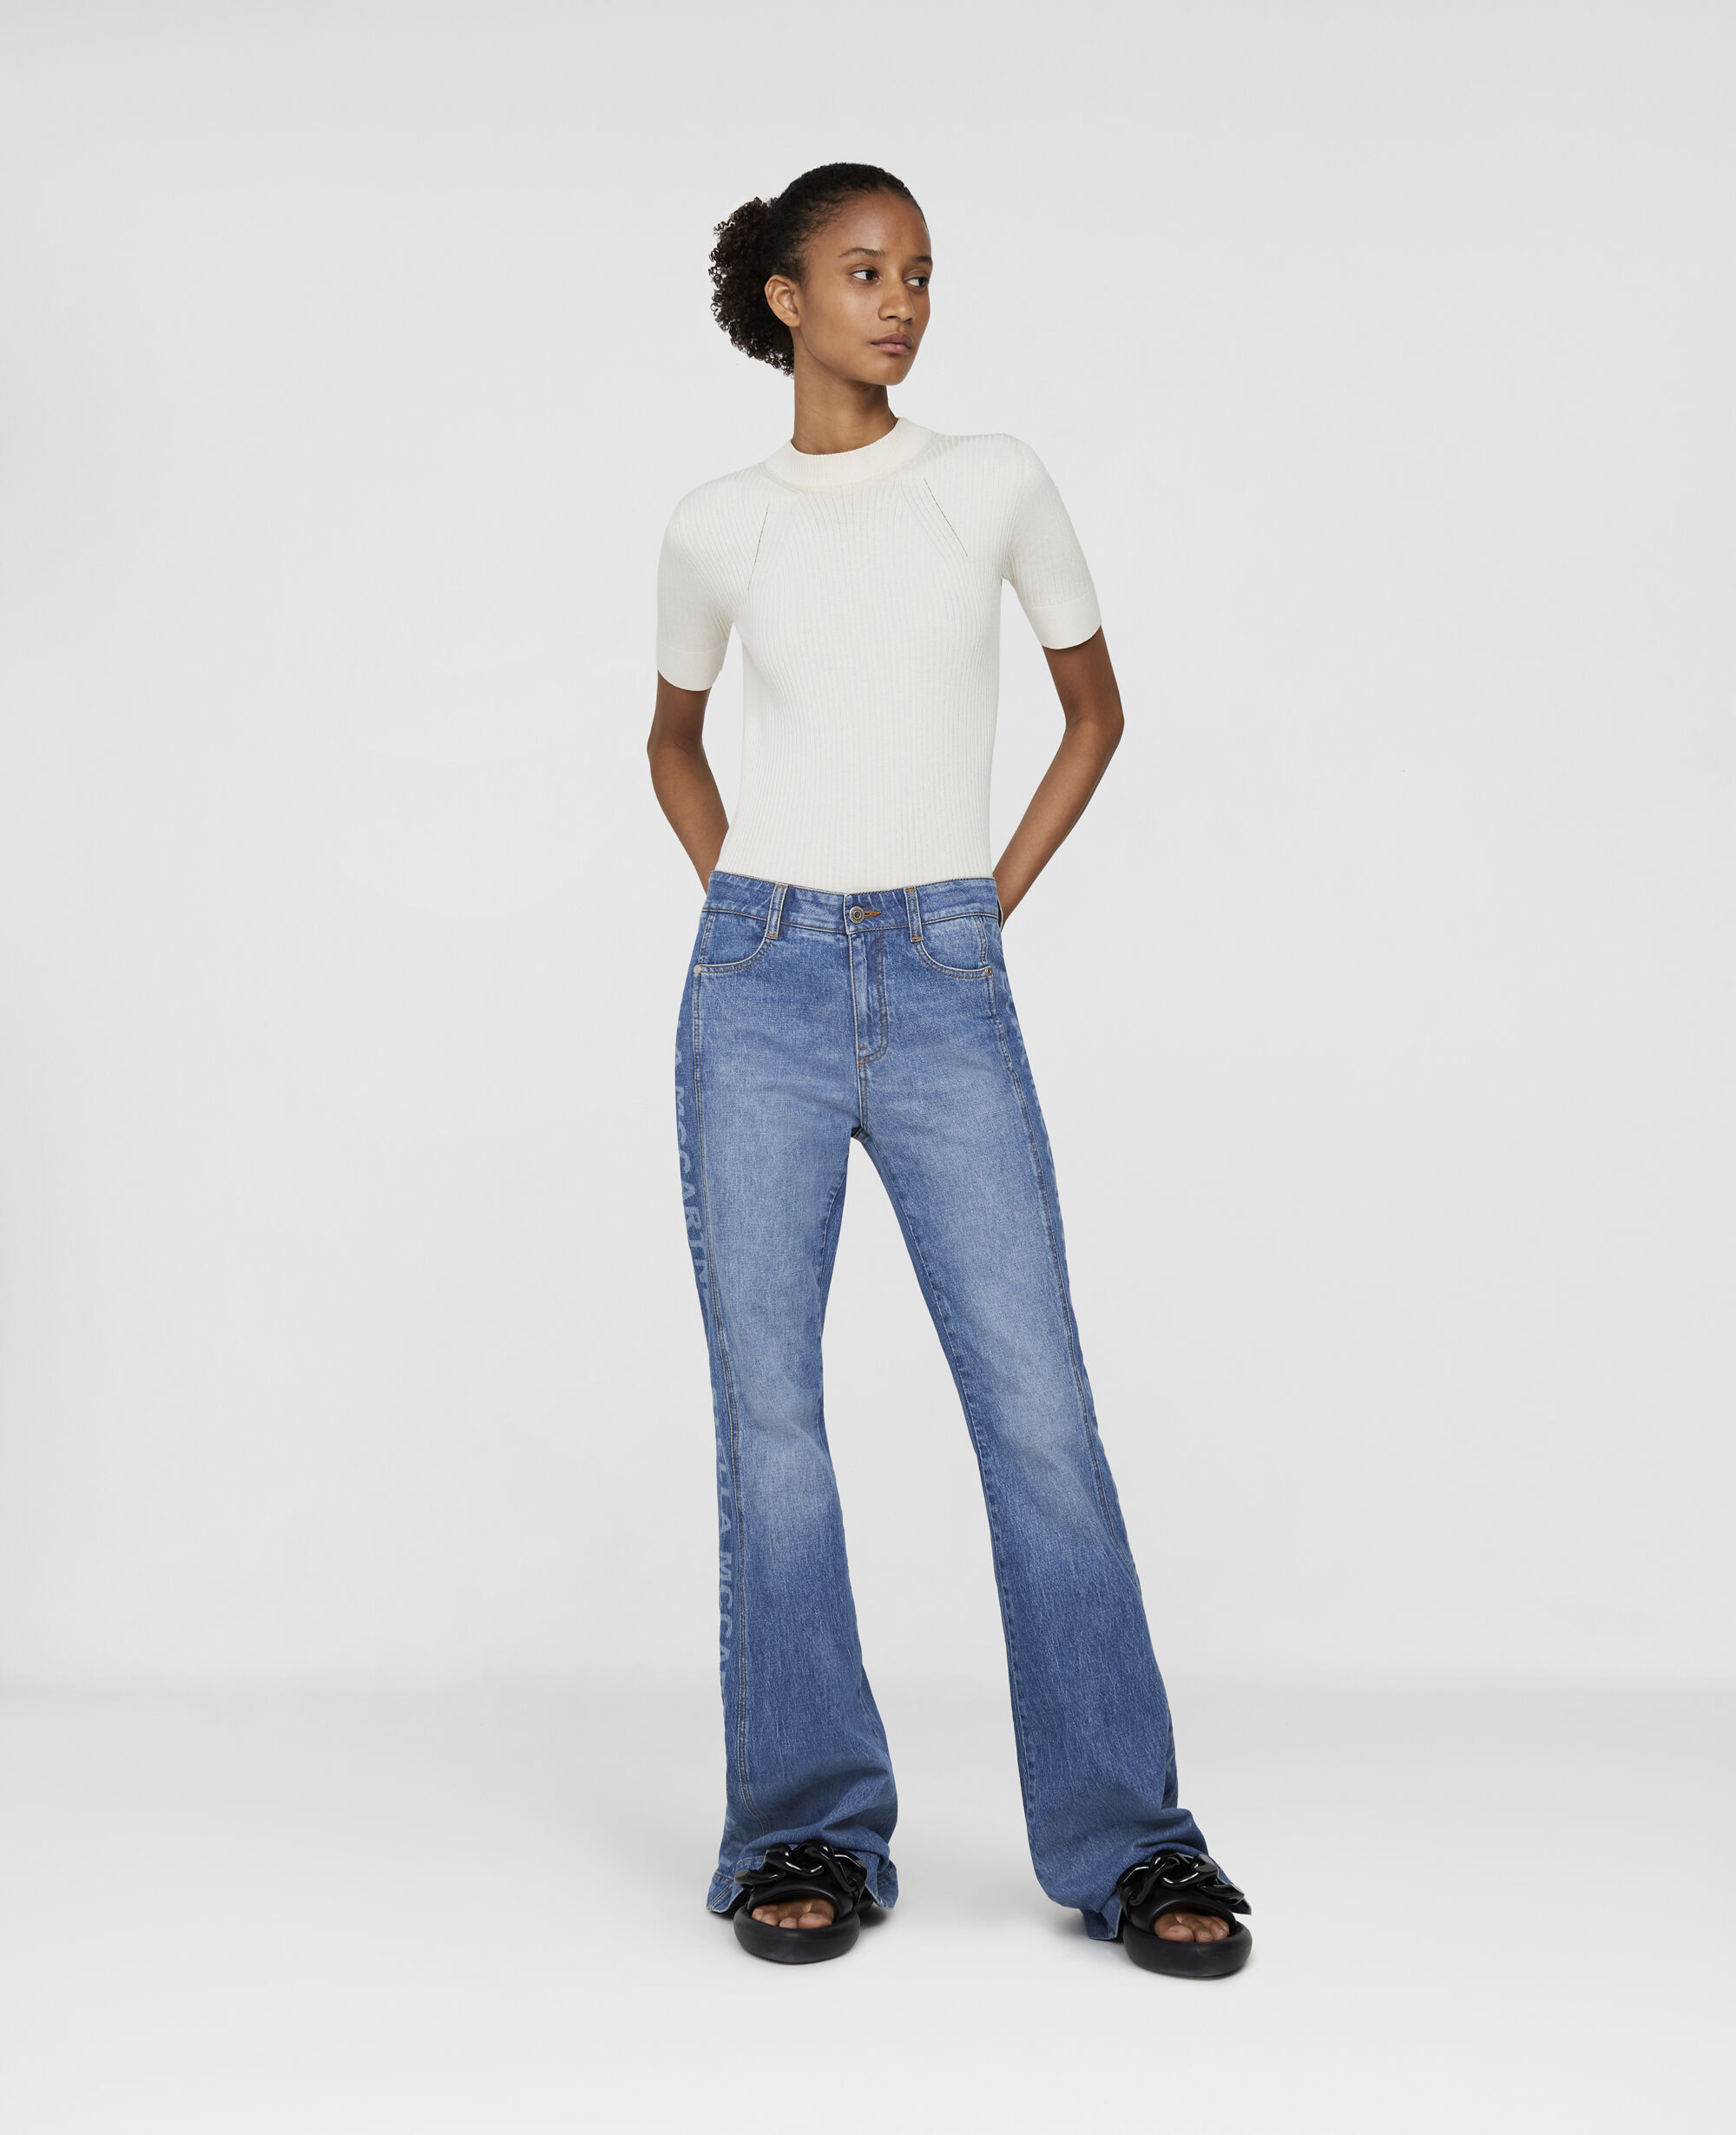 Stella McCartney Denim Other Materials Jeans in Pink Womens Clothing Jeans Wide-leg jeans 